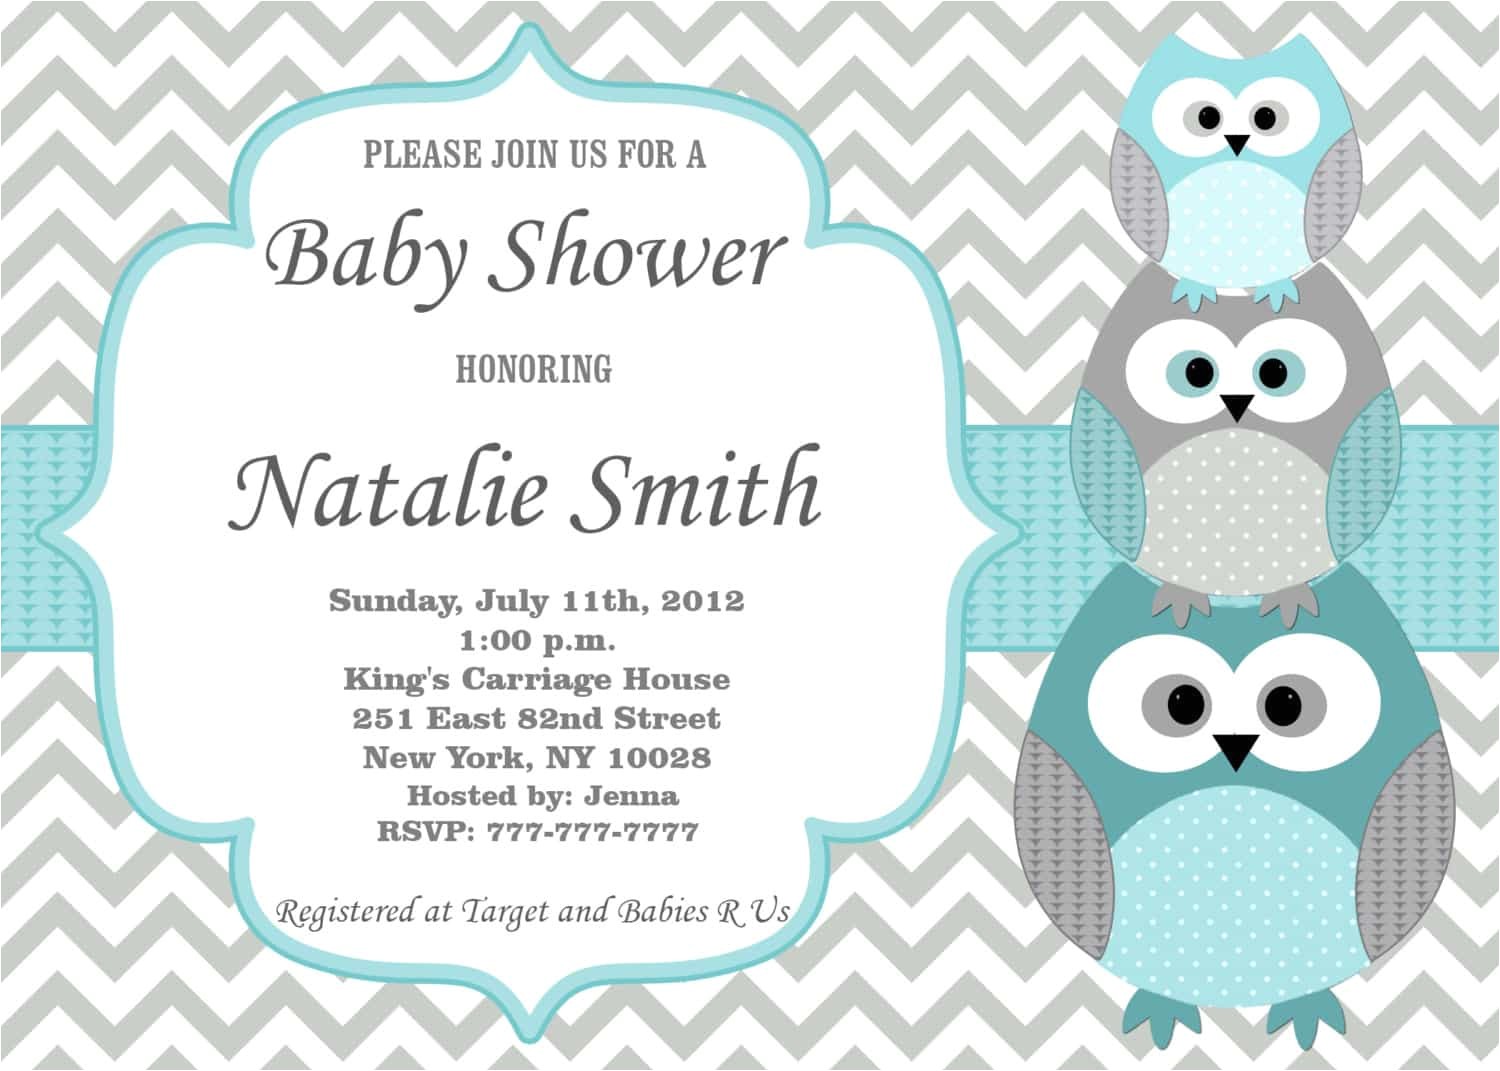 Free E Invitations for Baby Shower Baby Shower E Invitations Printable Egreeting Ecards